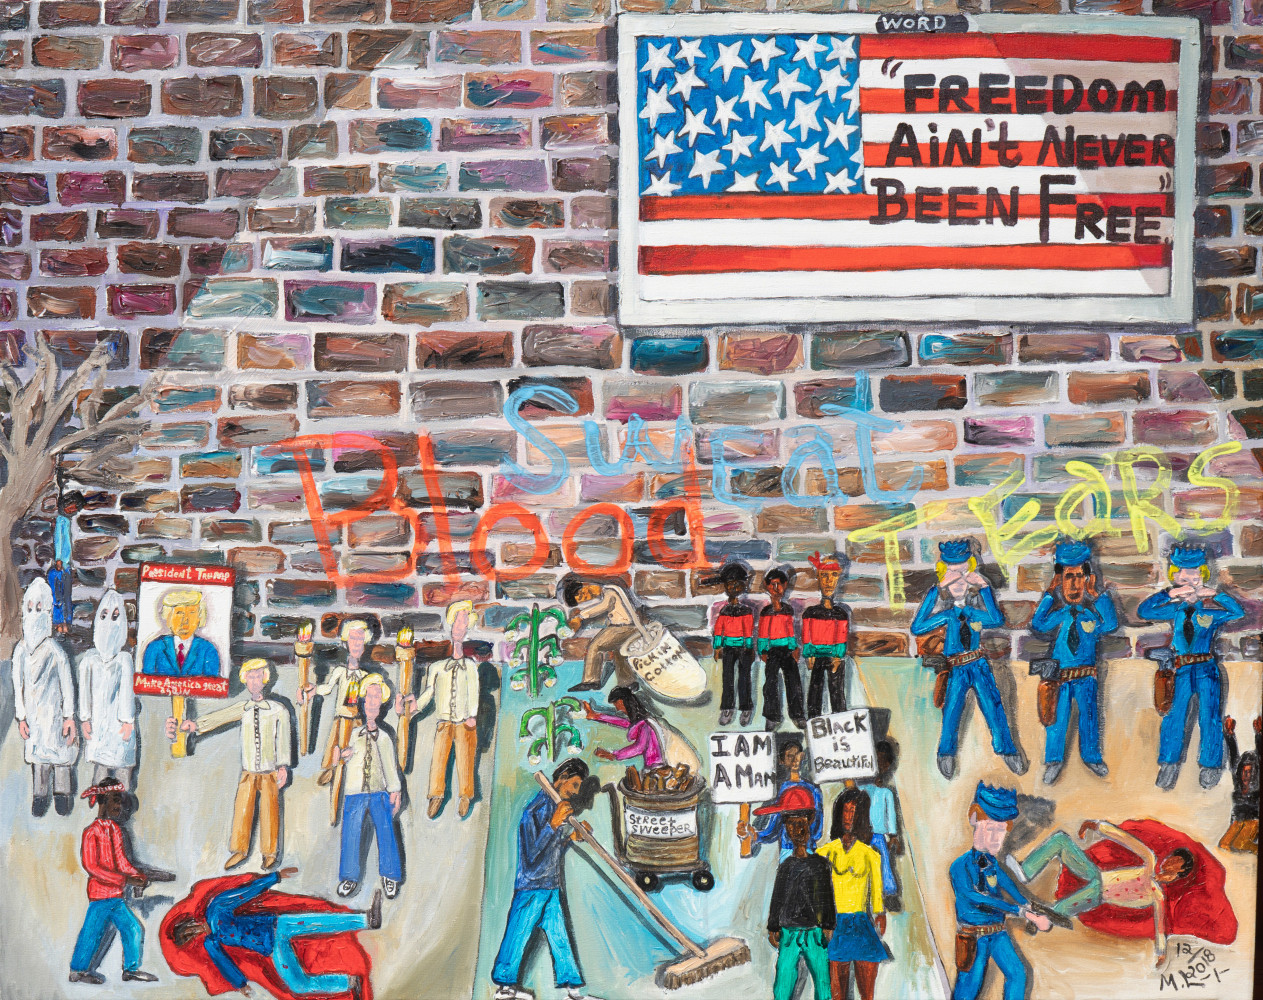 Michelangelo Lovelace
The Price for Freedom in America, 2018
Acrylic on canvas
40 x 51.25 inches